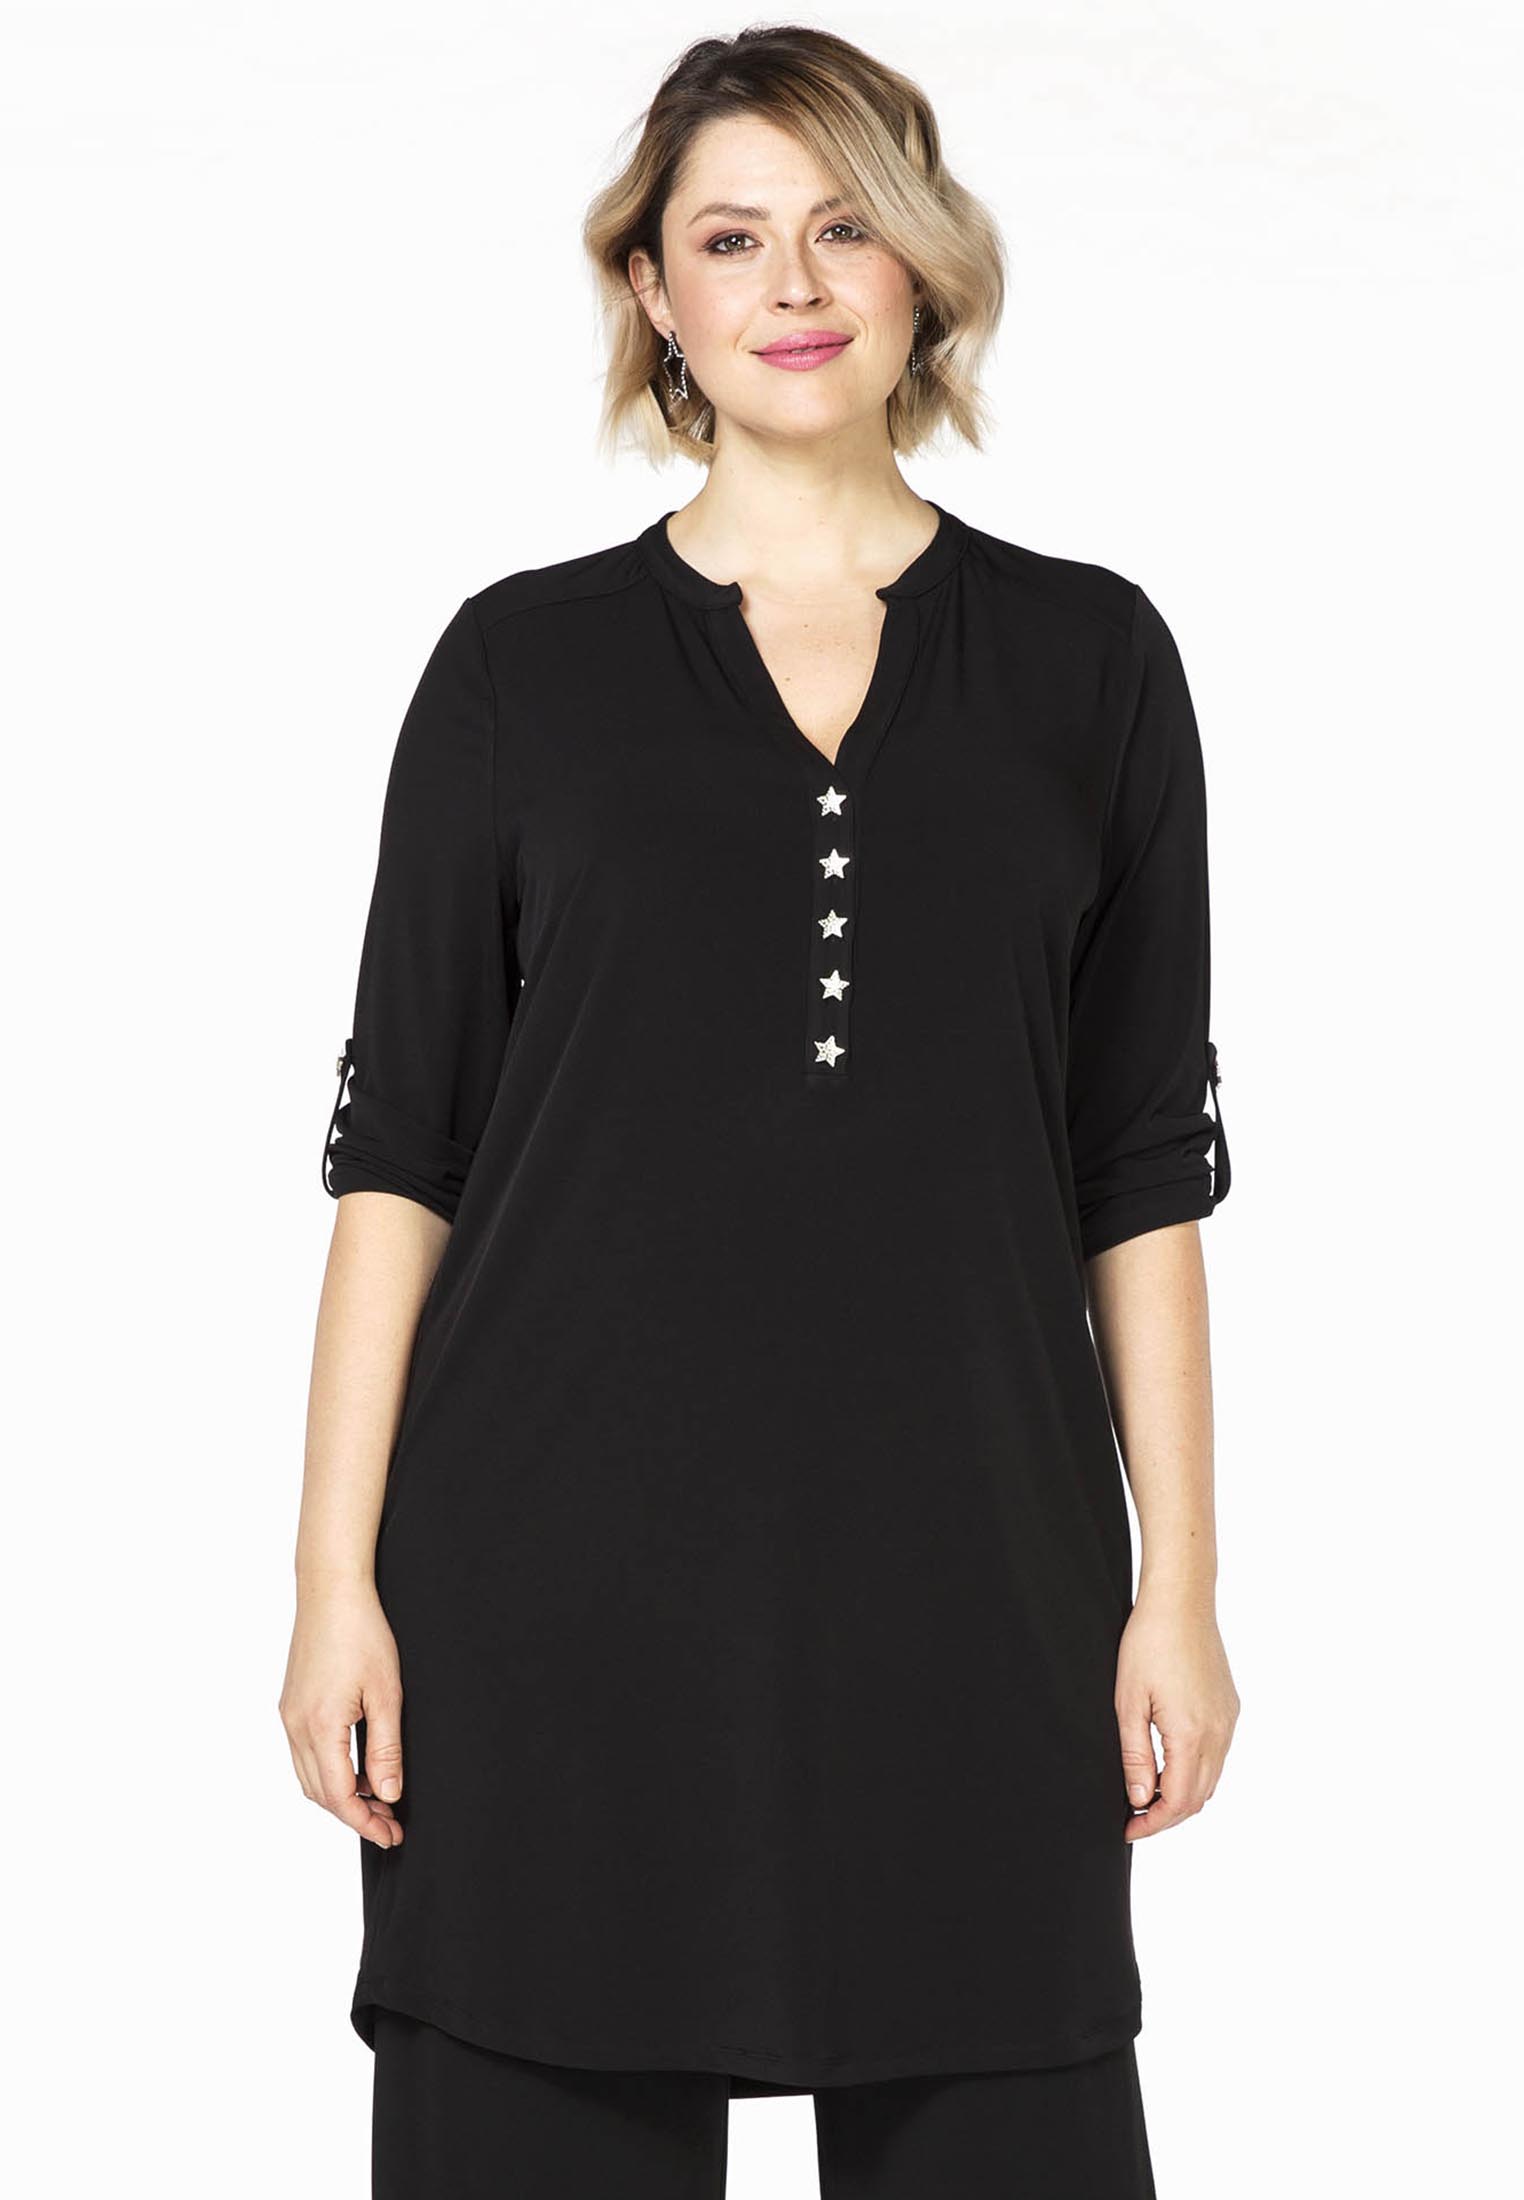 Tunic star buttons DOLCE 42/44 black